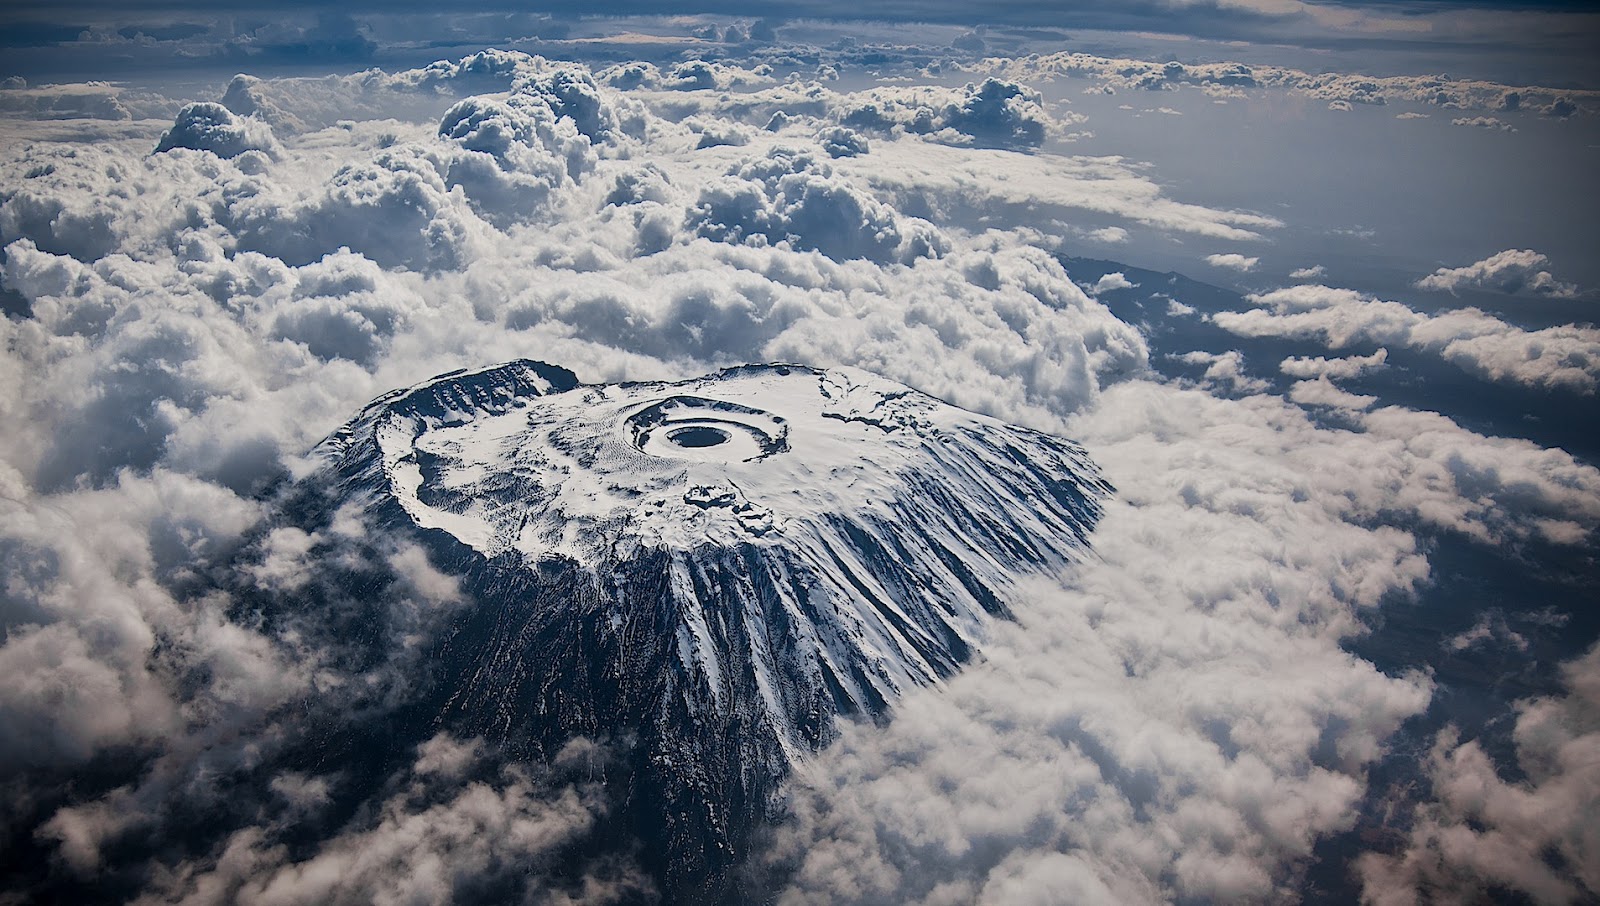 mount-kilimanjaro-from-an-airplane-snow-covered.jpg